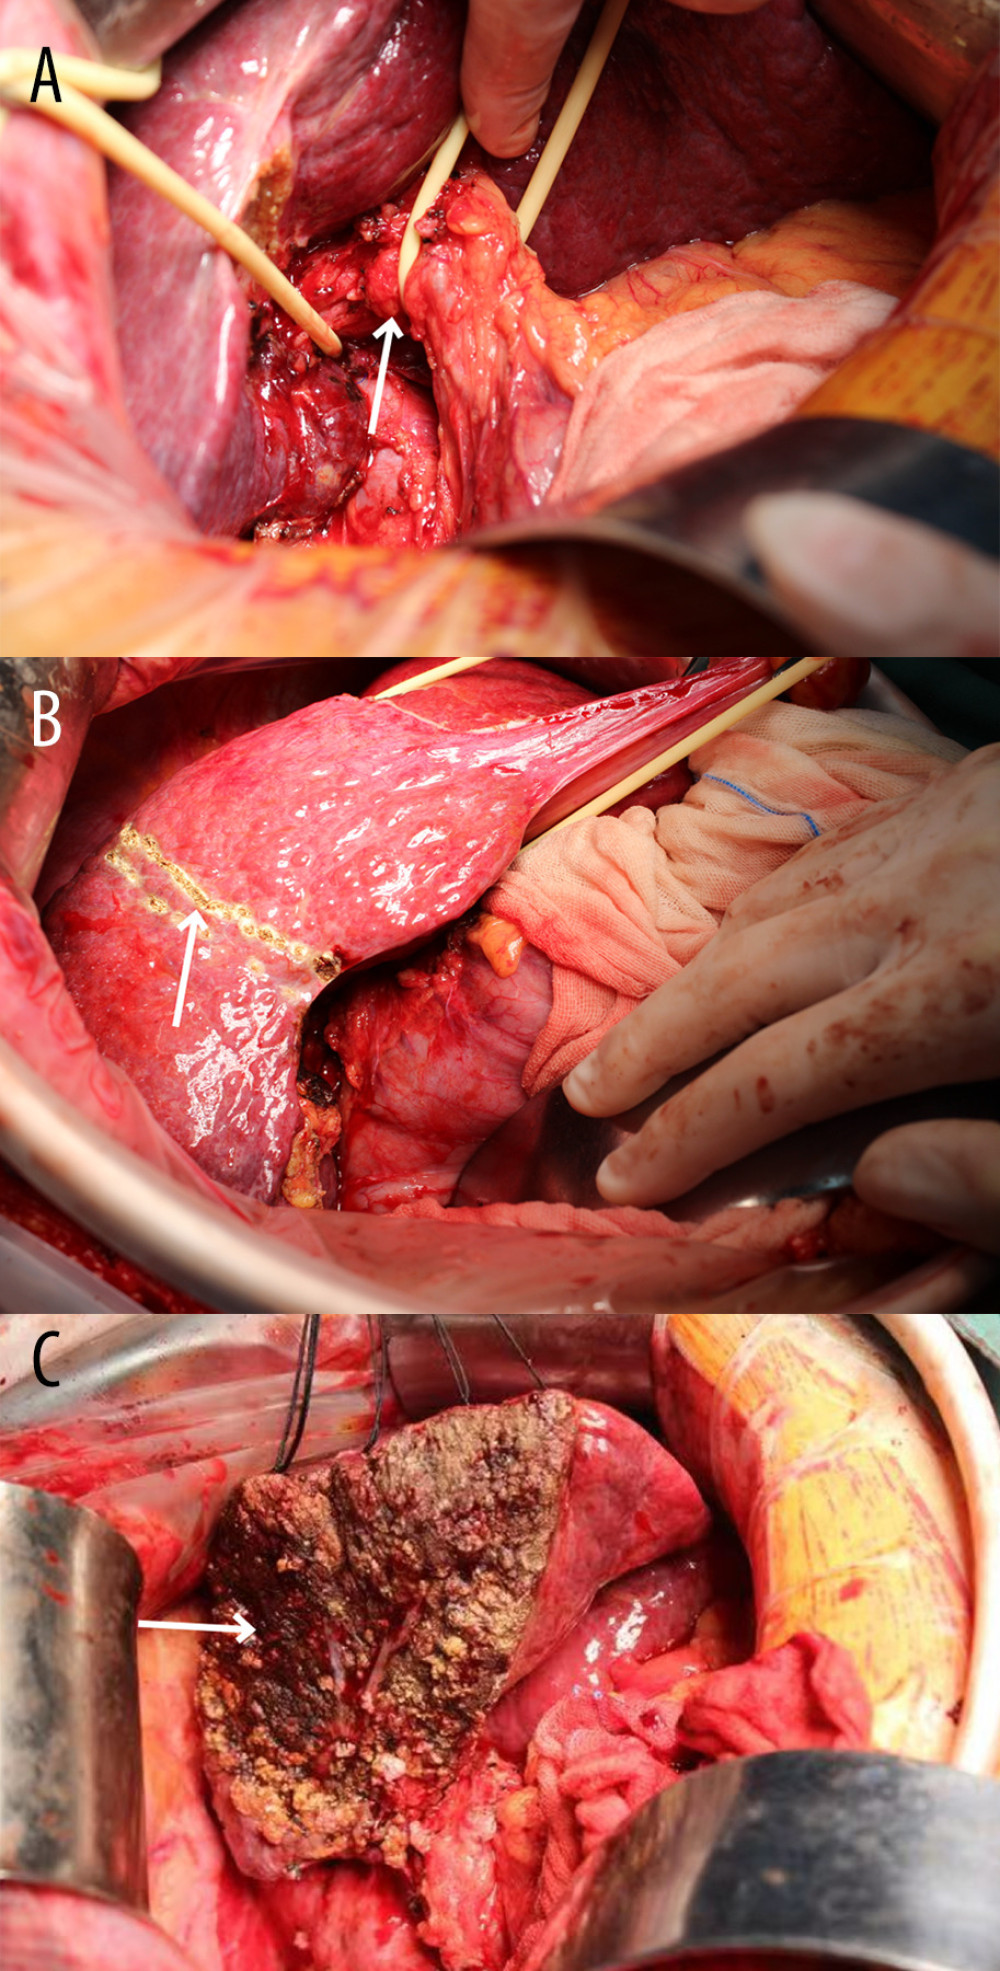 Intraoperative images of the open right hemi-hepatectomy. (A) Control of the first hepatic portal (white arrow). (B) Resection guideline based on the ischemic boundary (white arrow). (C) The right hemi-liver is resected and removed. The left hemi-liver remains (white arrow).